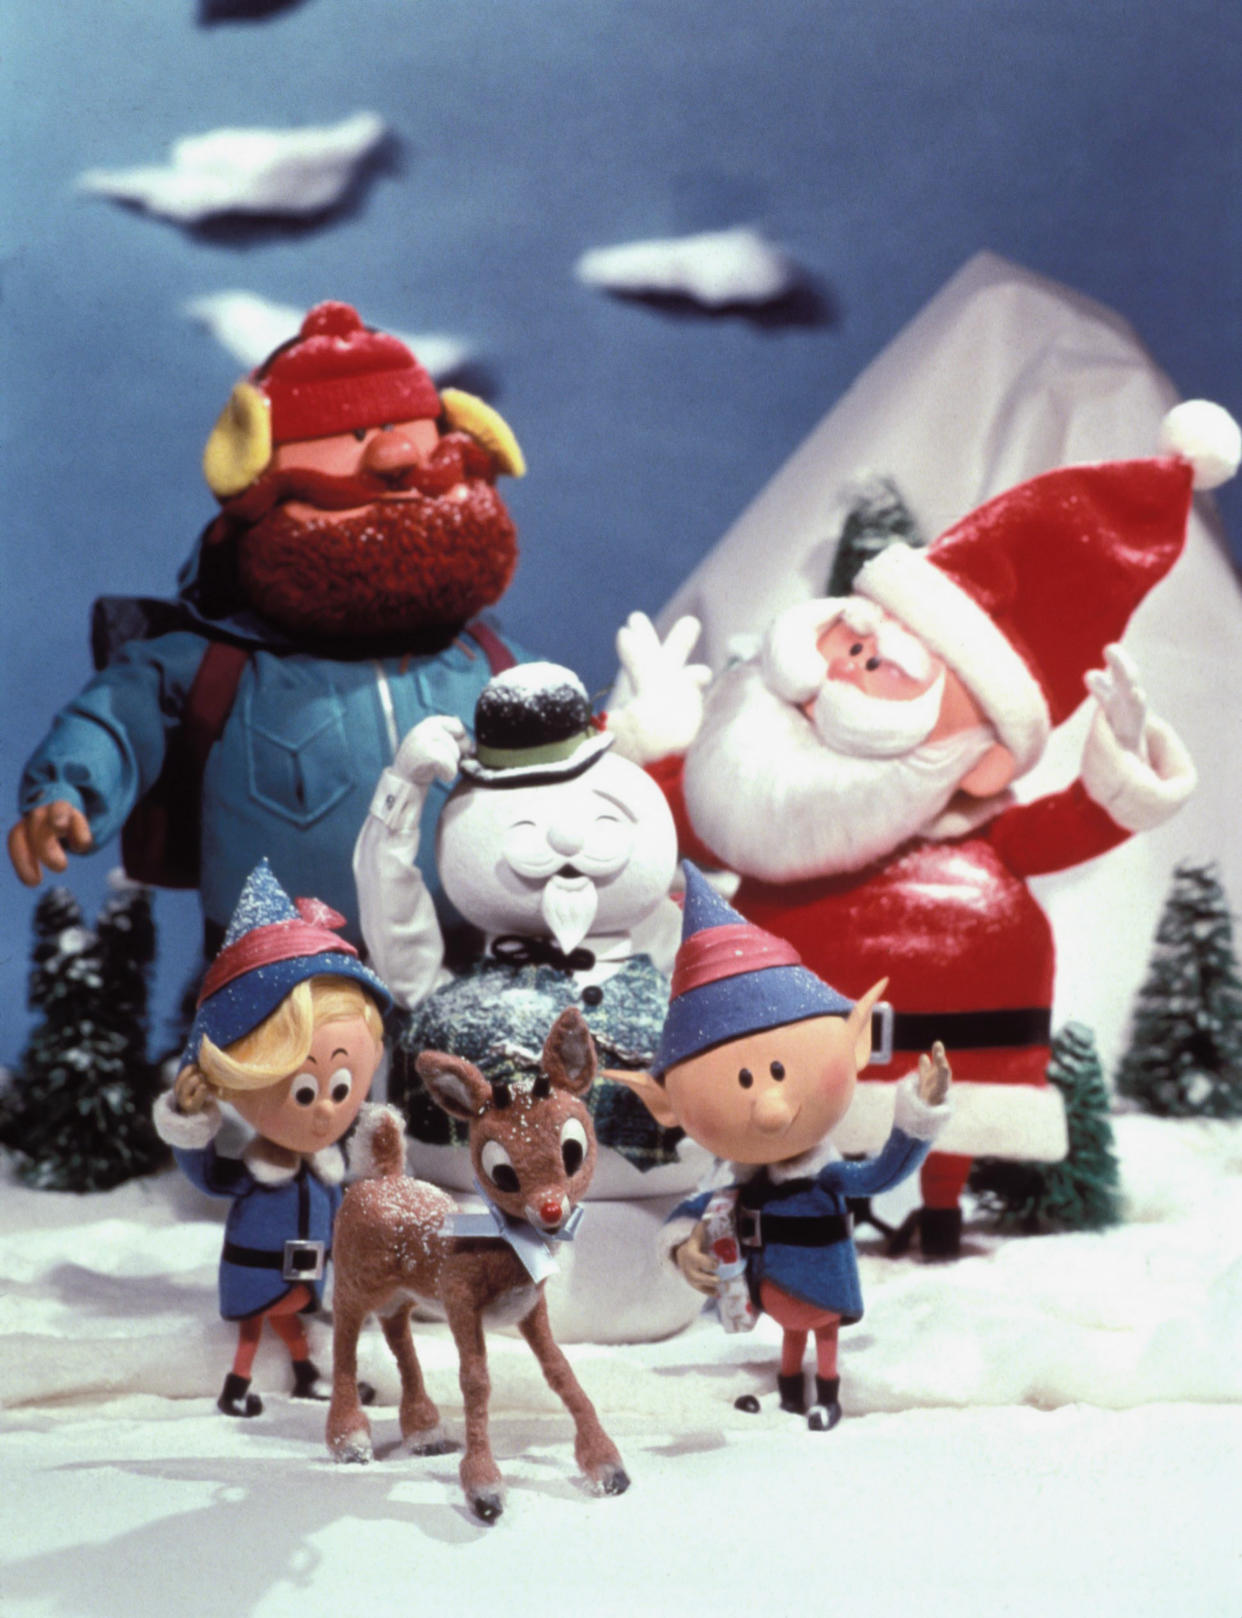 RUDOLPH THE RED-NOSED REINDEER -- Pictured: (l-r) Front Row: Hermey, Rudolph, Head Elf, Yukon Cornelius, Sam the Snowman, Santa Claus  (Photo by NBCU Photo Bank/NBCUniversal via Getty Images via Getty Images)